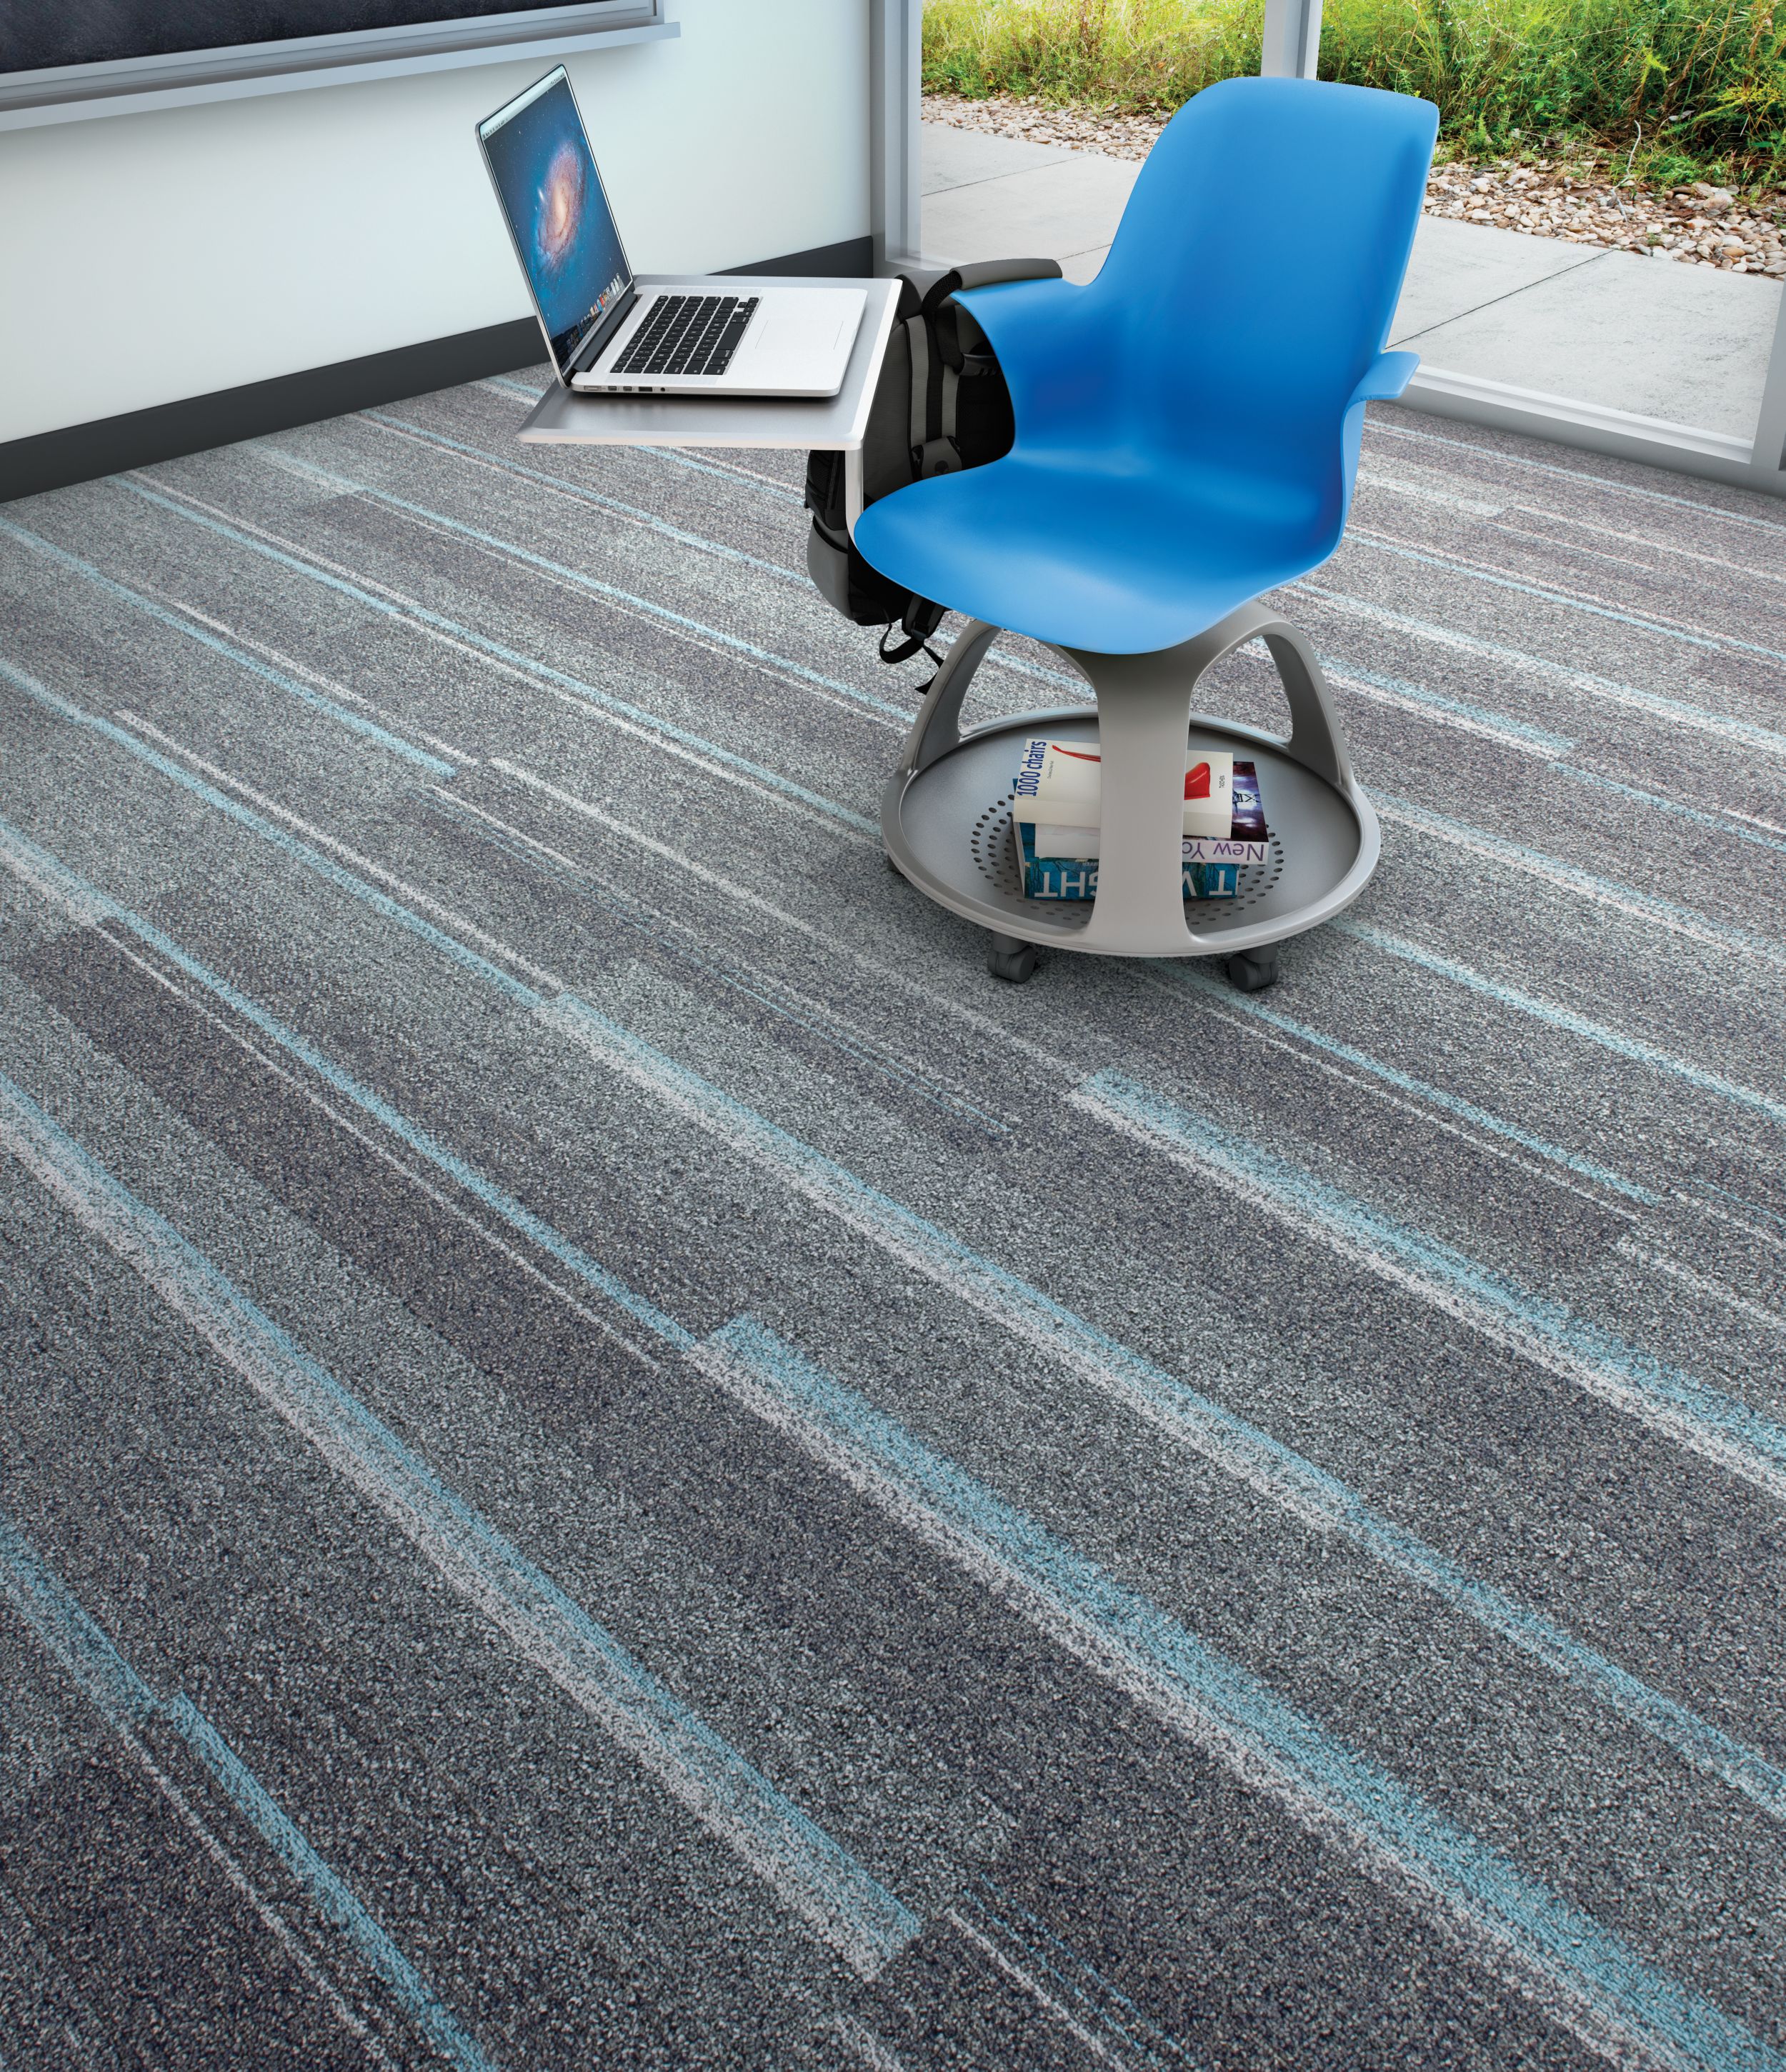 Interface Ground Waves plank carpet tile in classroom with blue desk chair combination imagen número 3